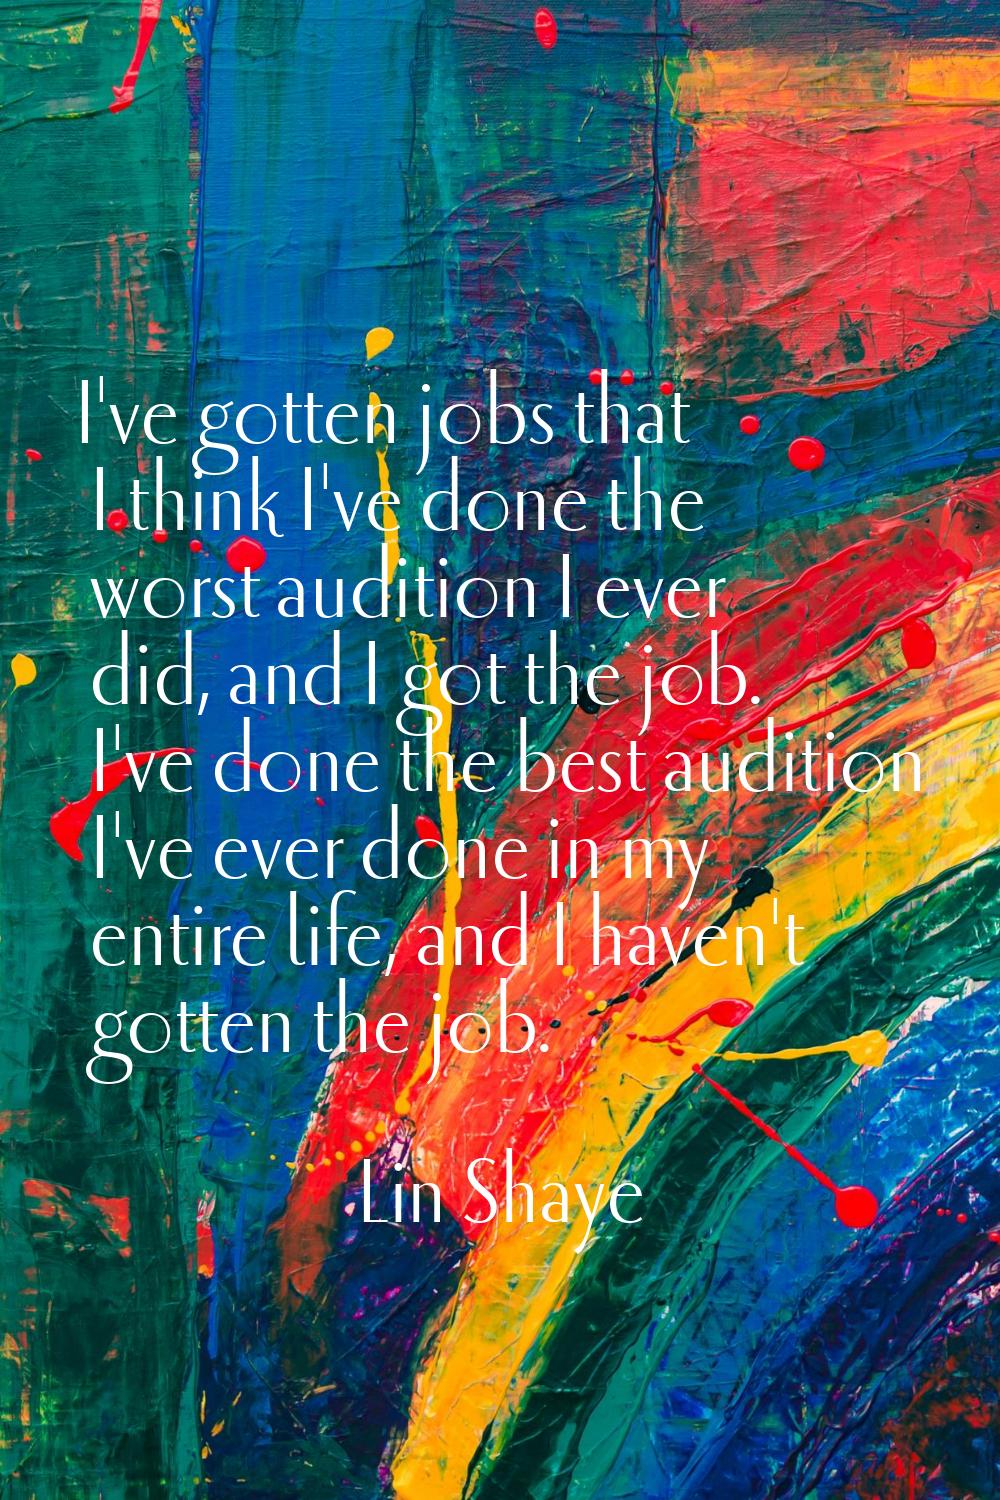 I've gotten jobs that I think I've done the worst audition I ever did, and I got the job. I've done